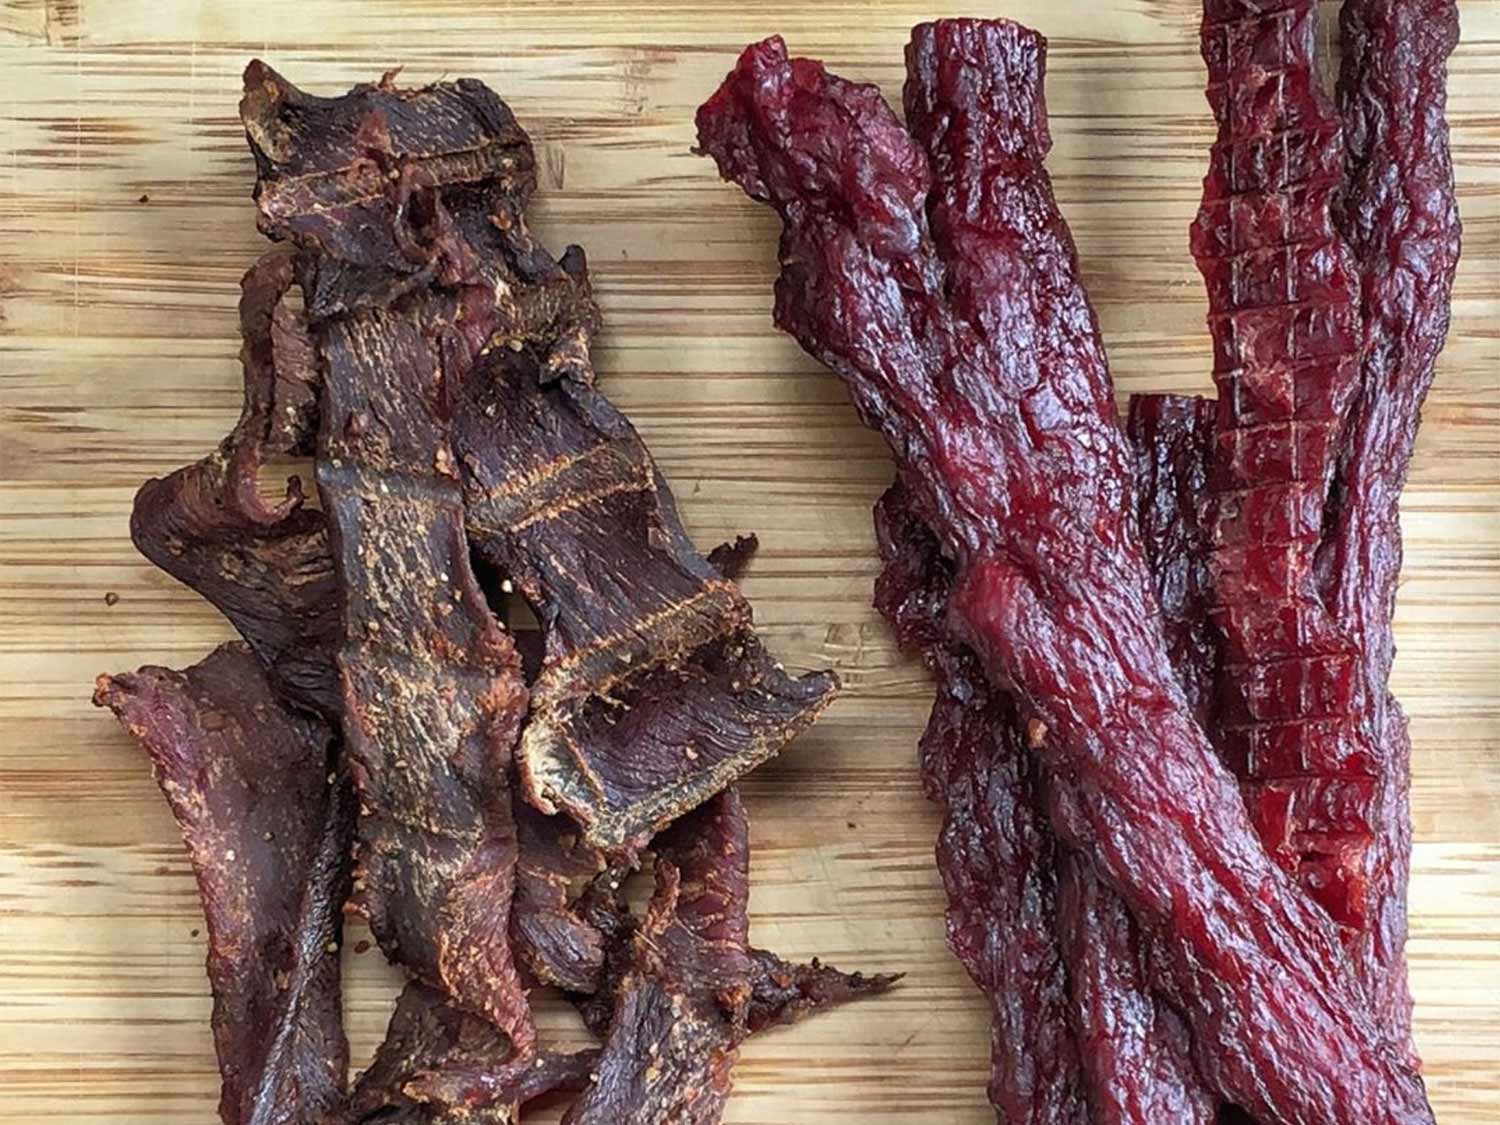 A Chef's Guide: How to Make Venison Jerky - North American Whitetail